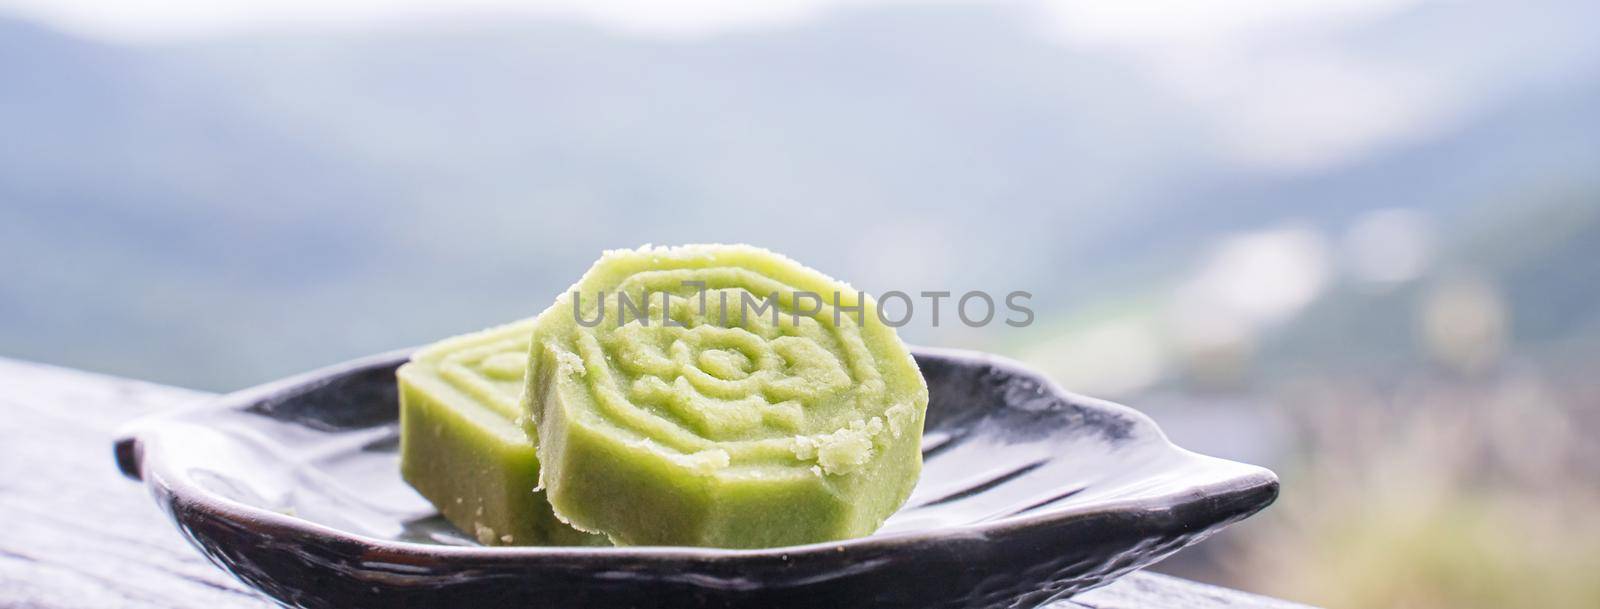 Delicious green mung bean cake with black tea plate on wooden railing of a teahouse in Taiwan with beautiful landscape in background, close up. by ROMIXIMAGE